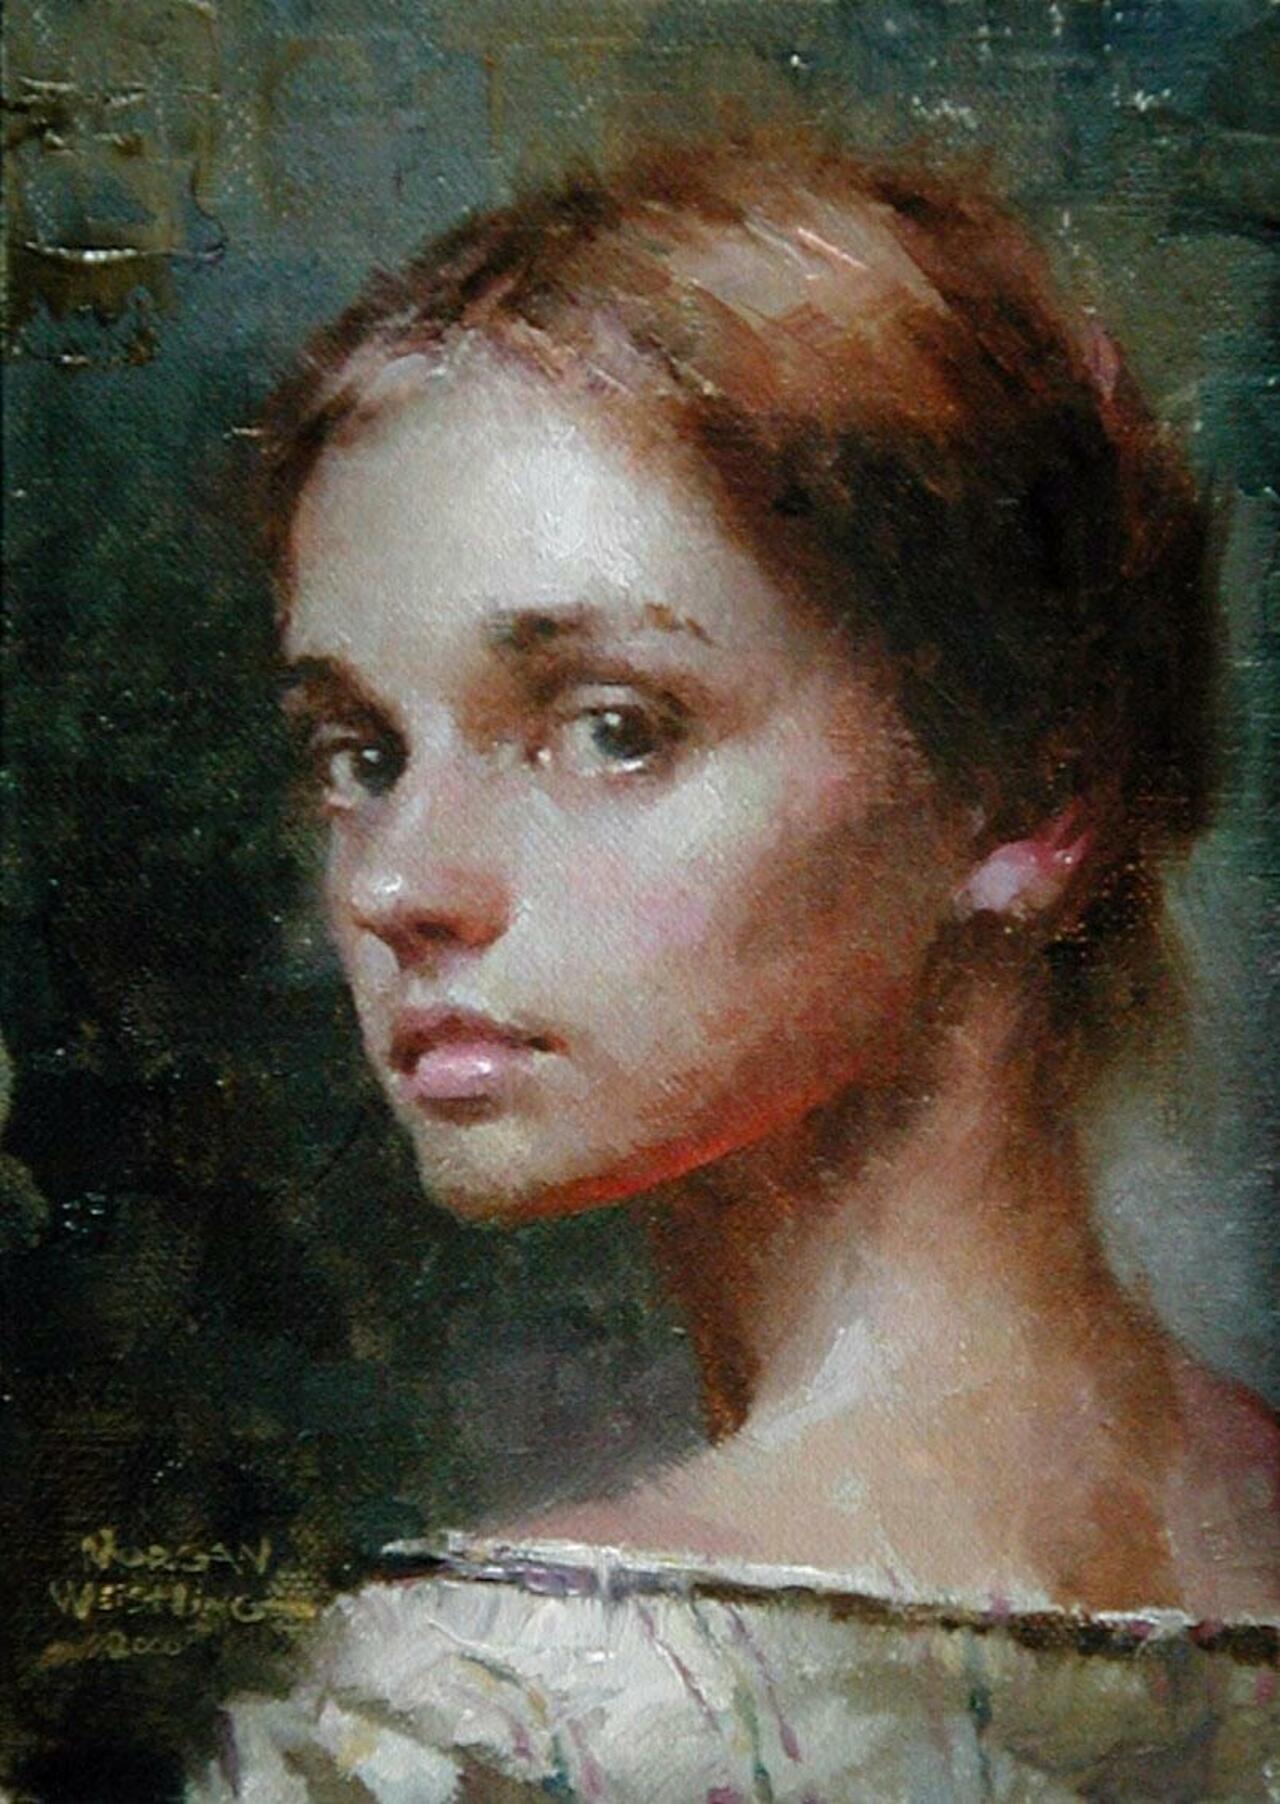 A Momentary Glance
by Morgan Weistling
American http://t.co/qLz5BBlefy